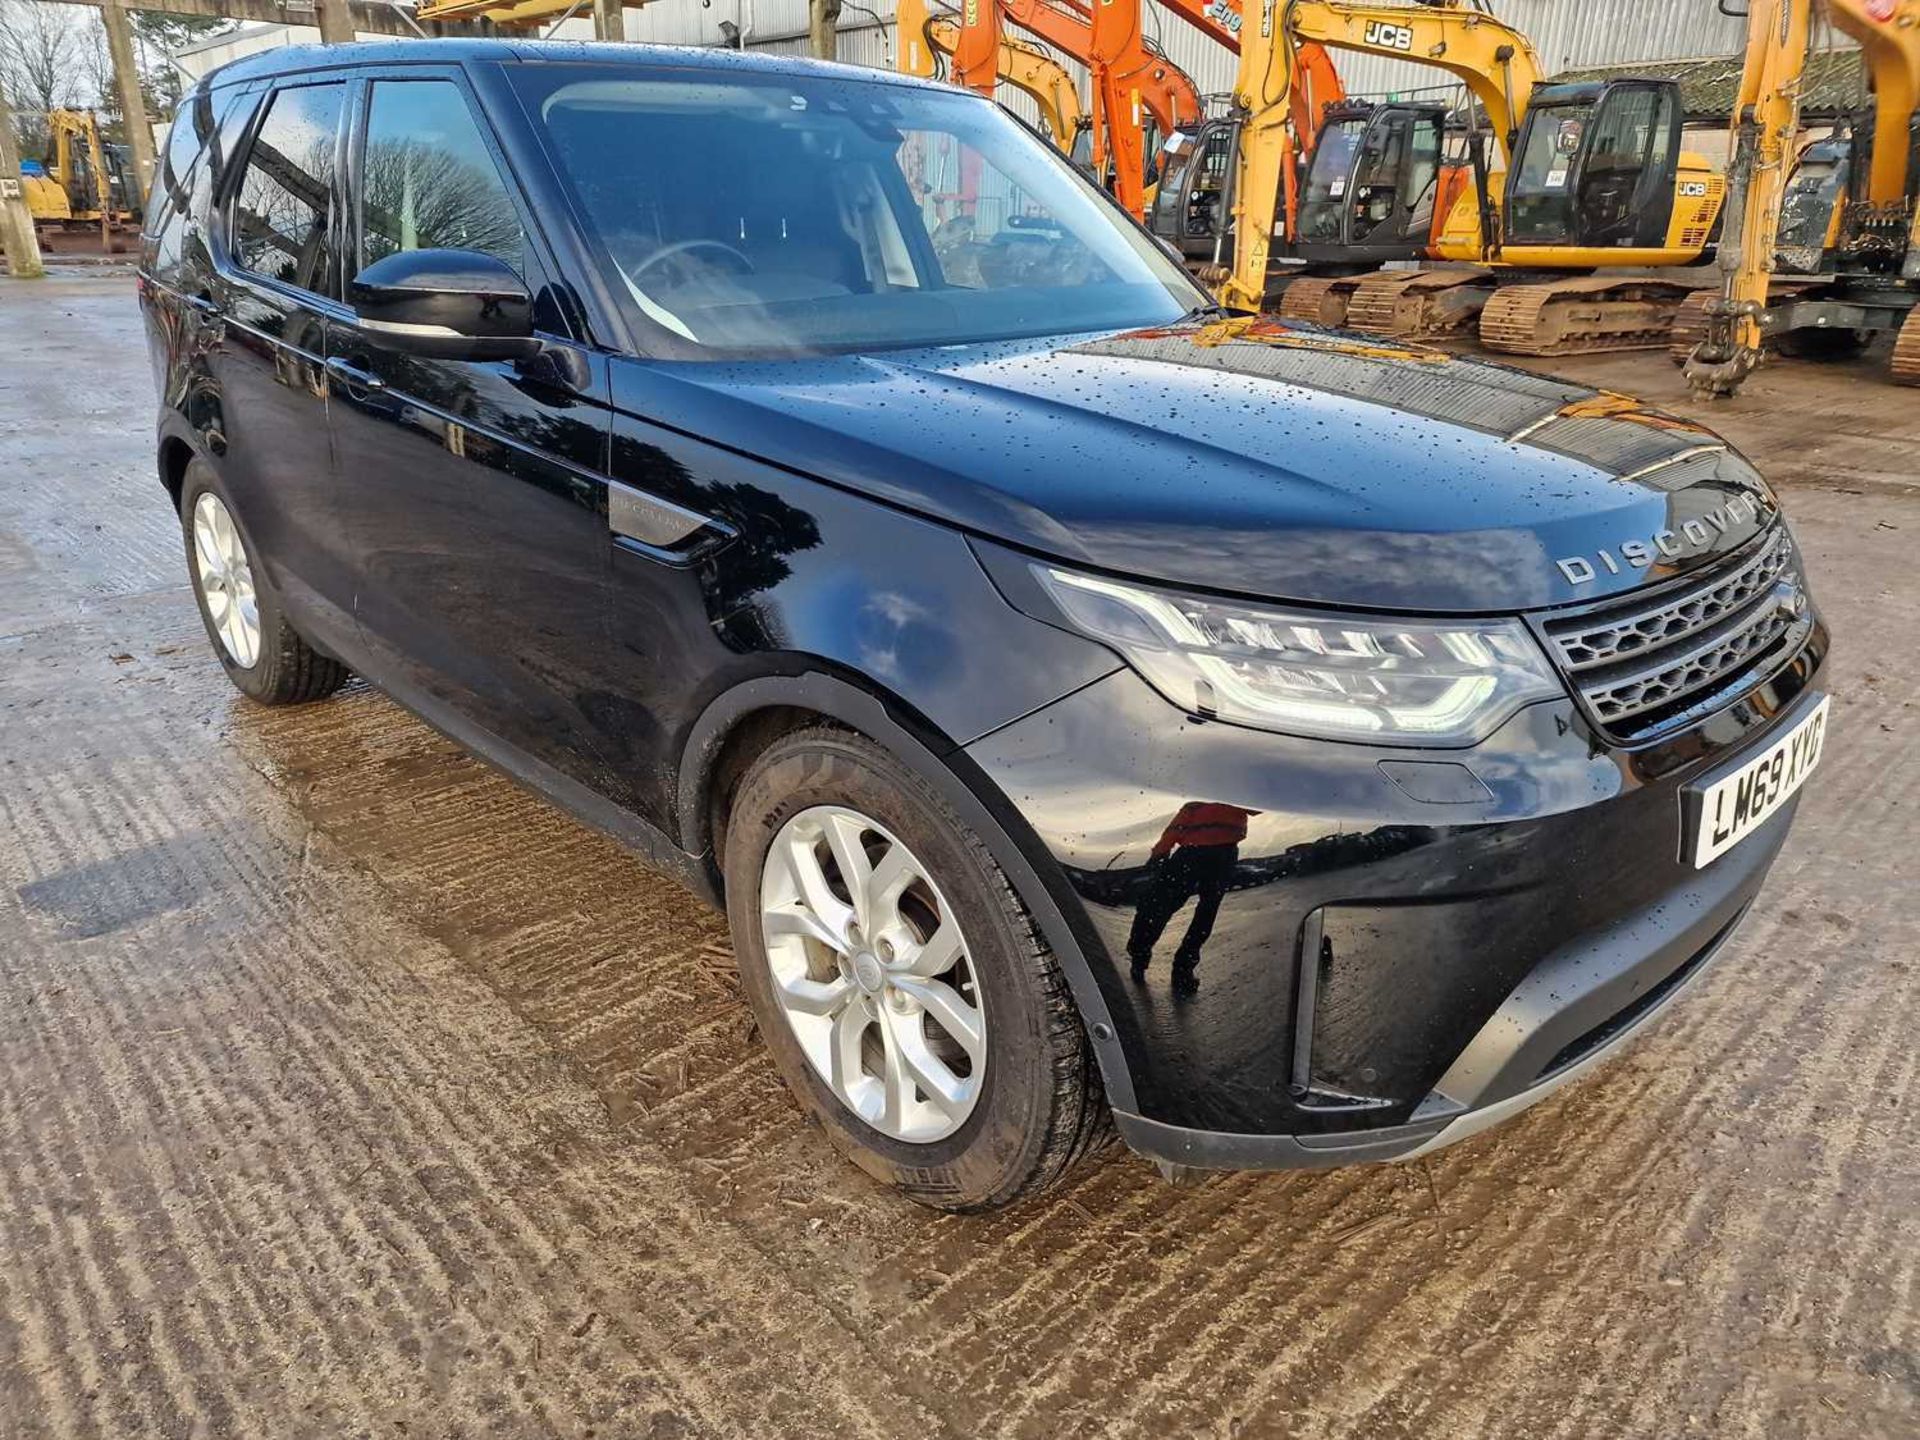 2019 Landrover Discovery SD4 SE 240 Commercial, Auto, Paddle Shift, Sat Nav, Reverse Camera, Parking - Image 7 of 26